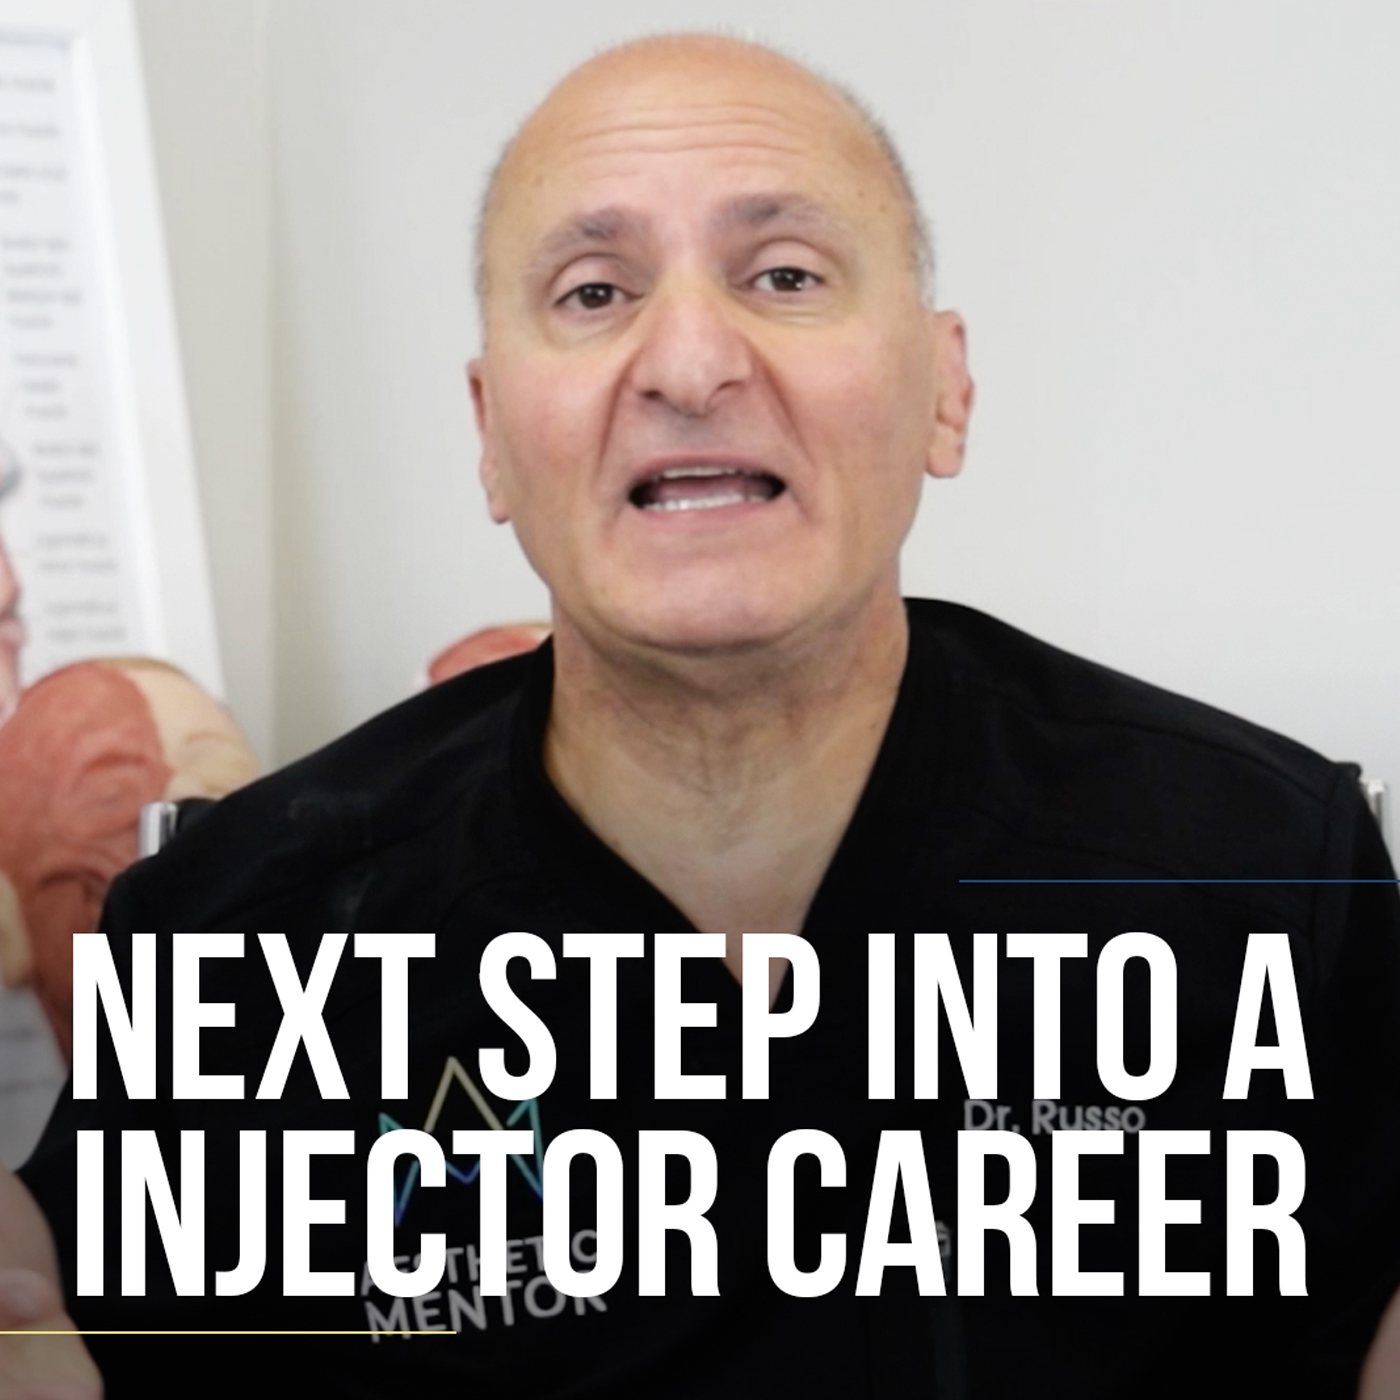 What is the next step into a nurse injector career?